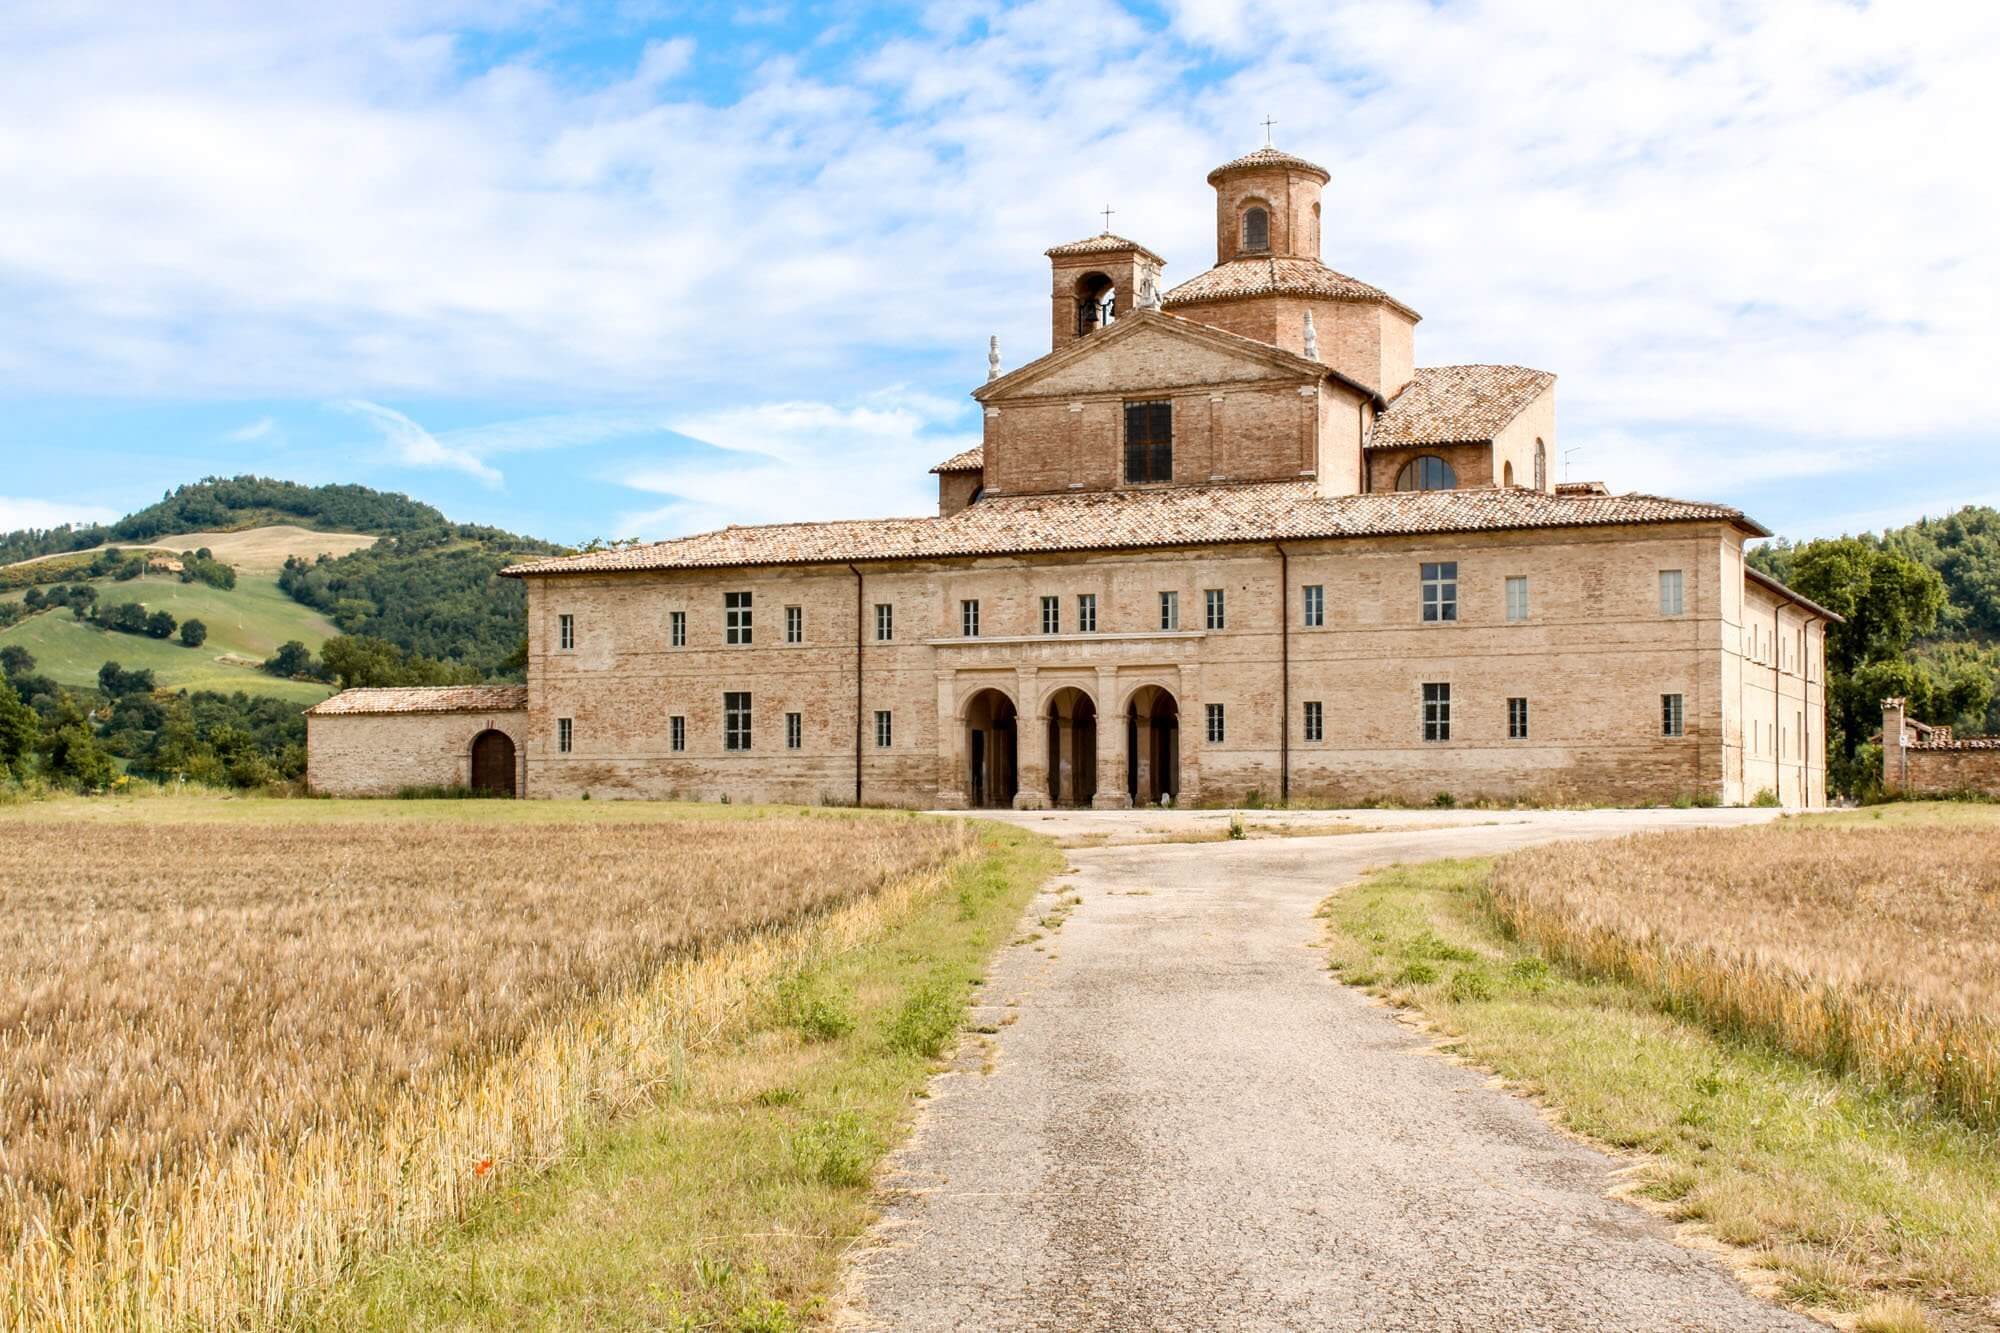 The Barco Ducale hunting lodge near Urbania, Le Marche, Italy